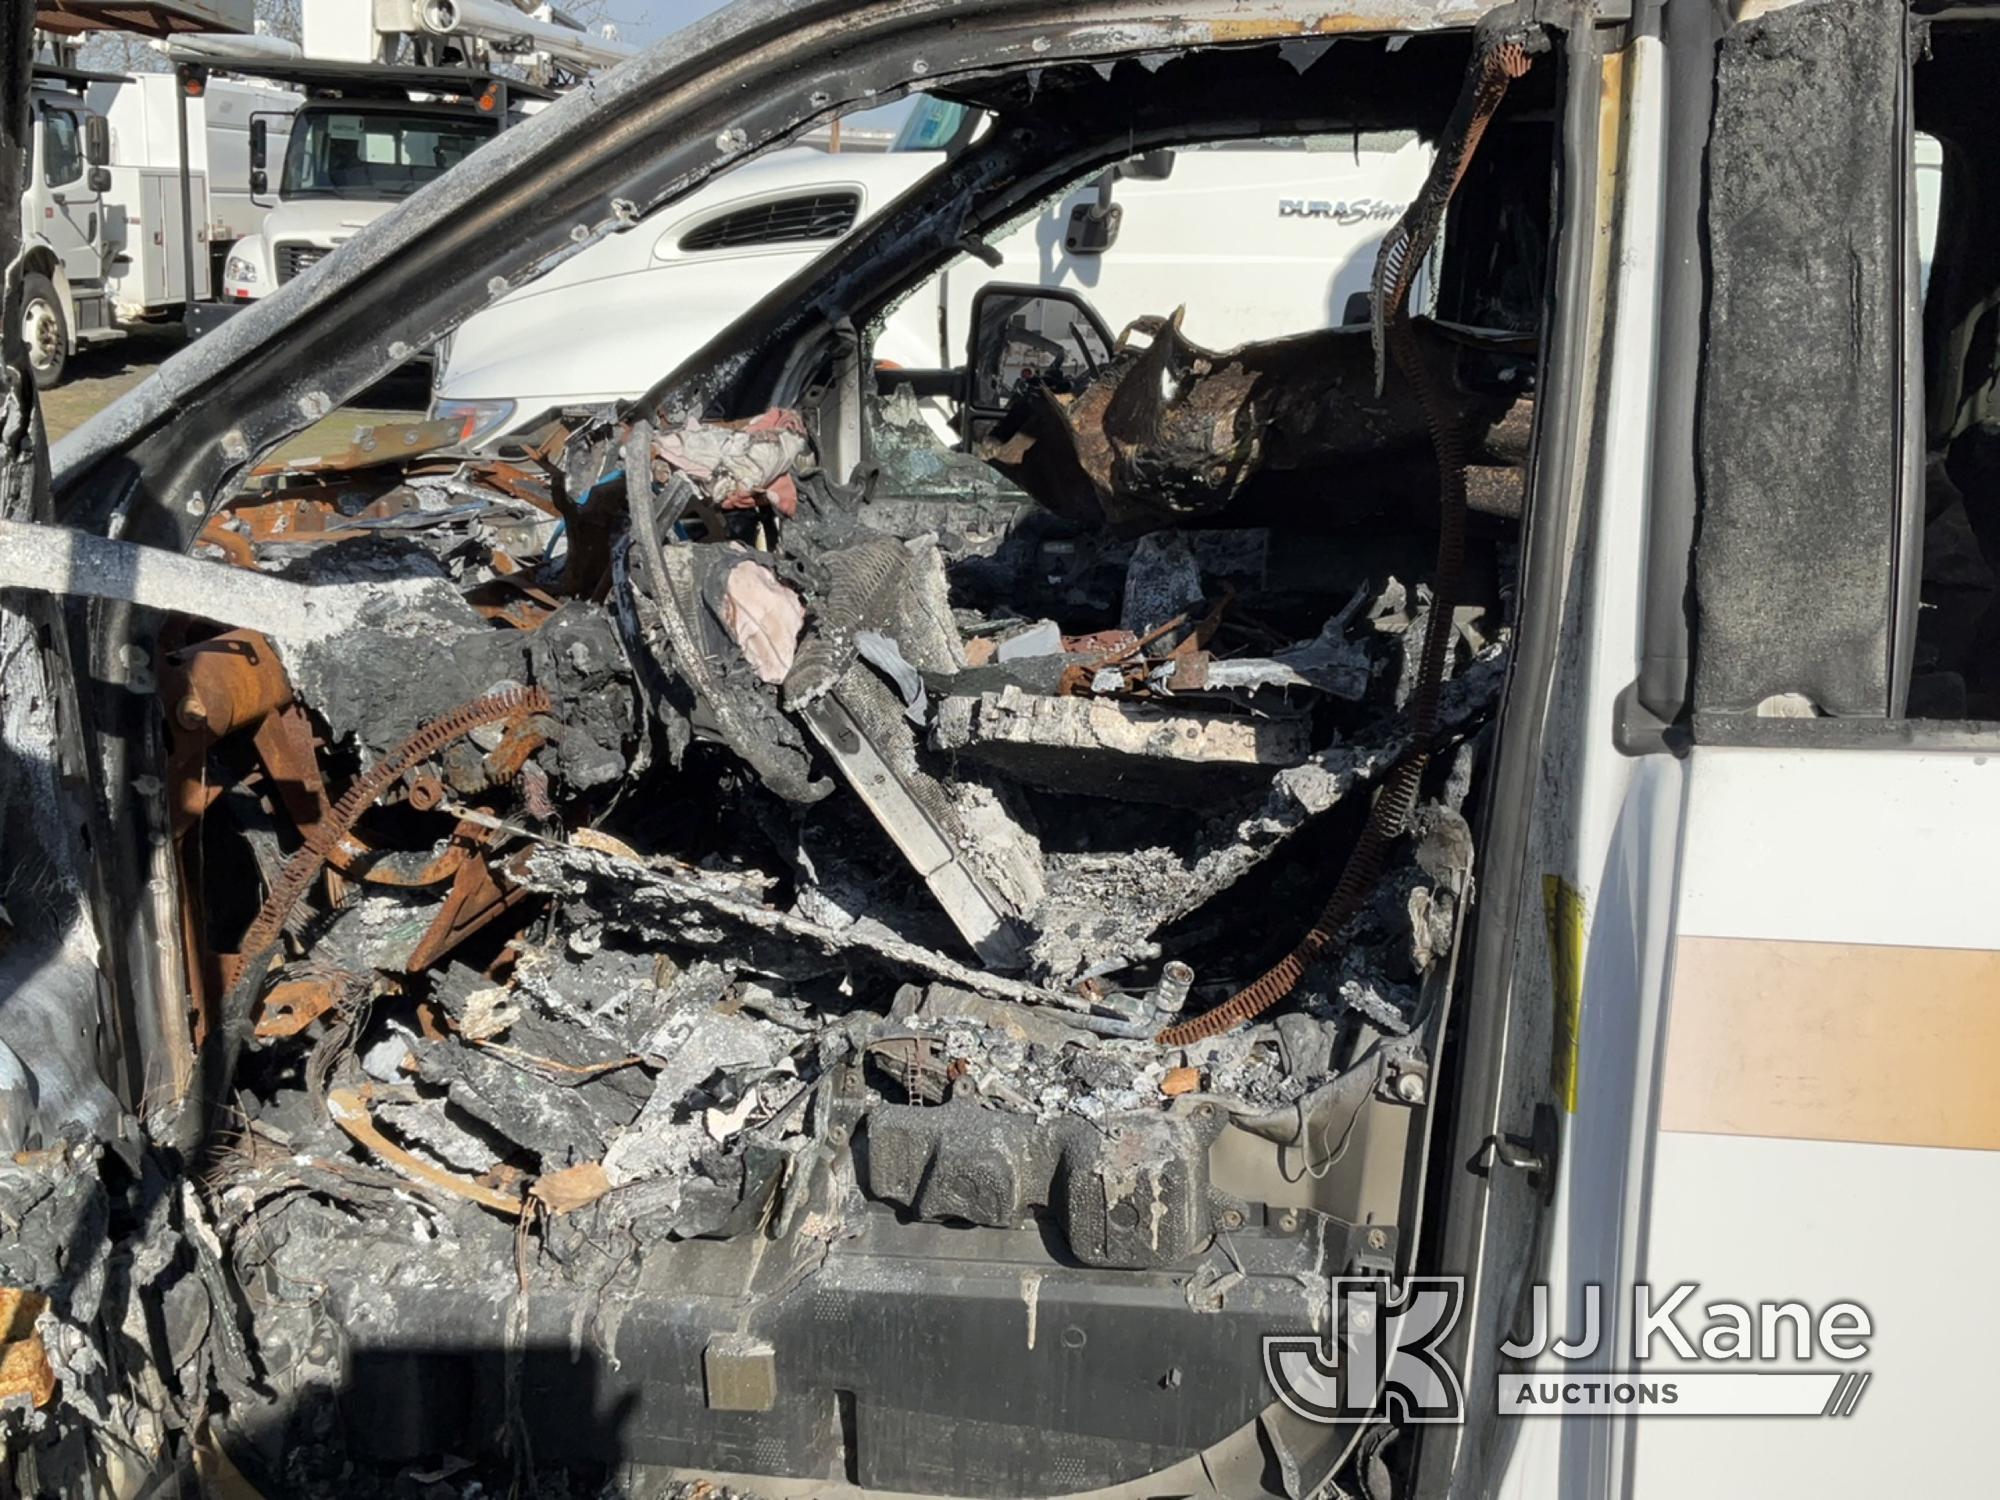 (Plains, PA) 2019 Ford F550 Extended-Cab Mechanics Service Truck Wrecked, Major Fire Damage, Parts O